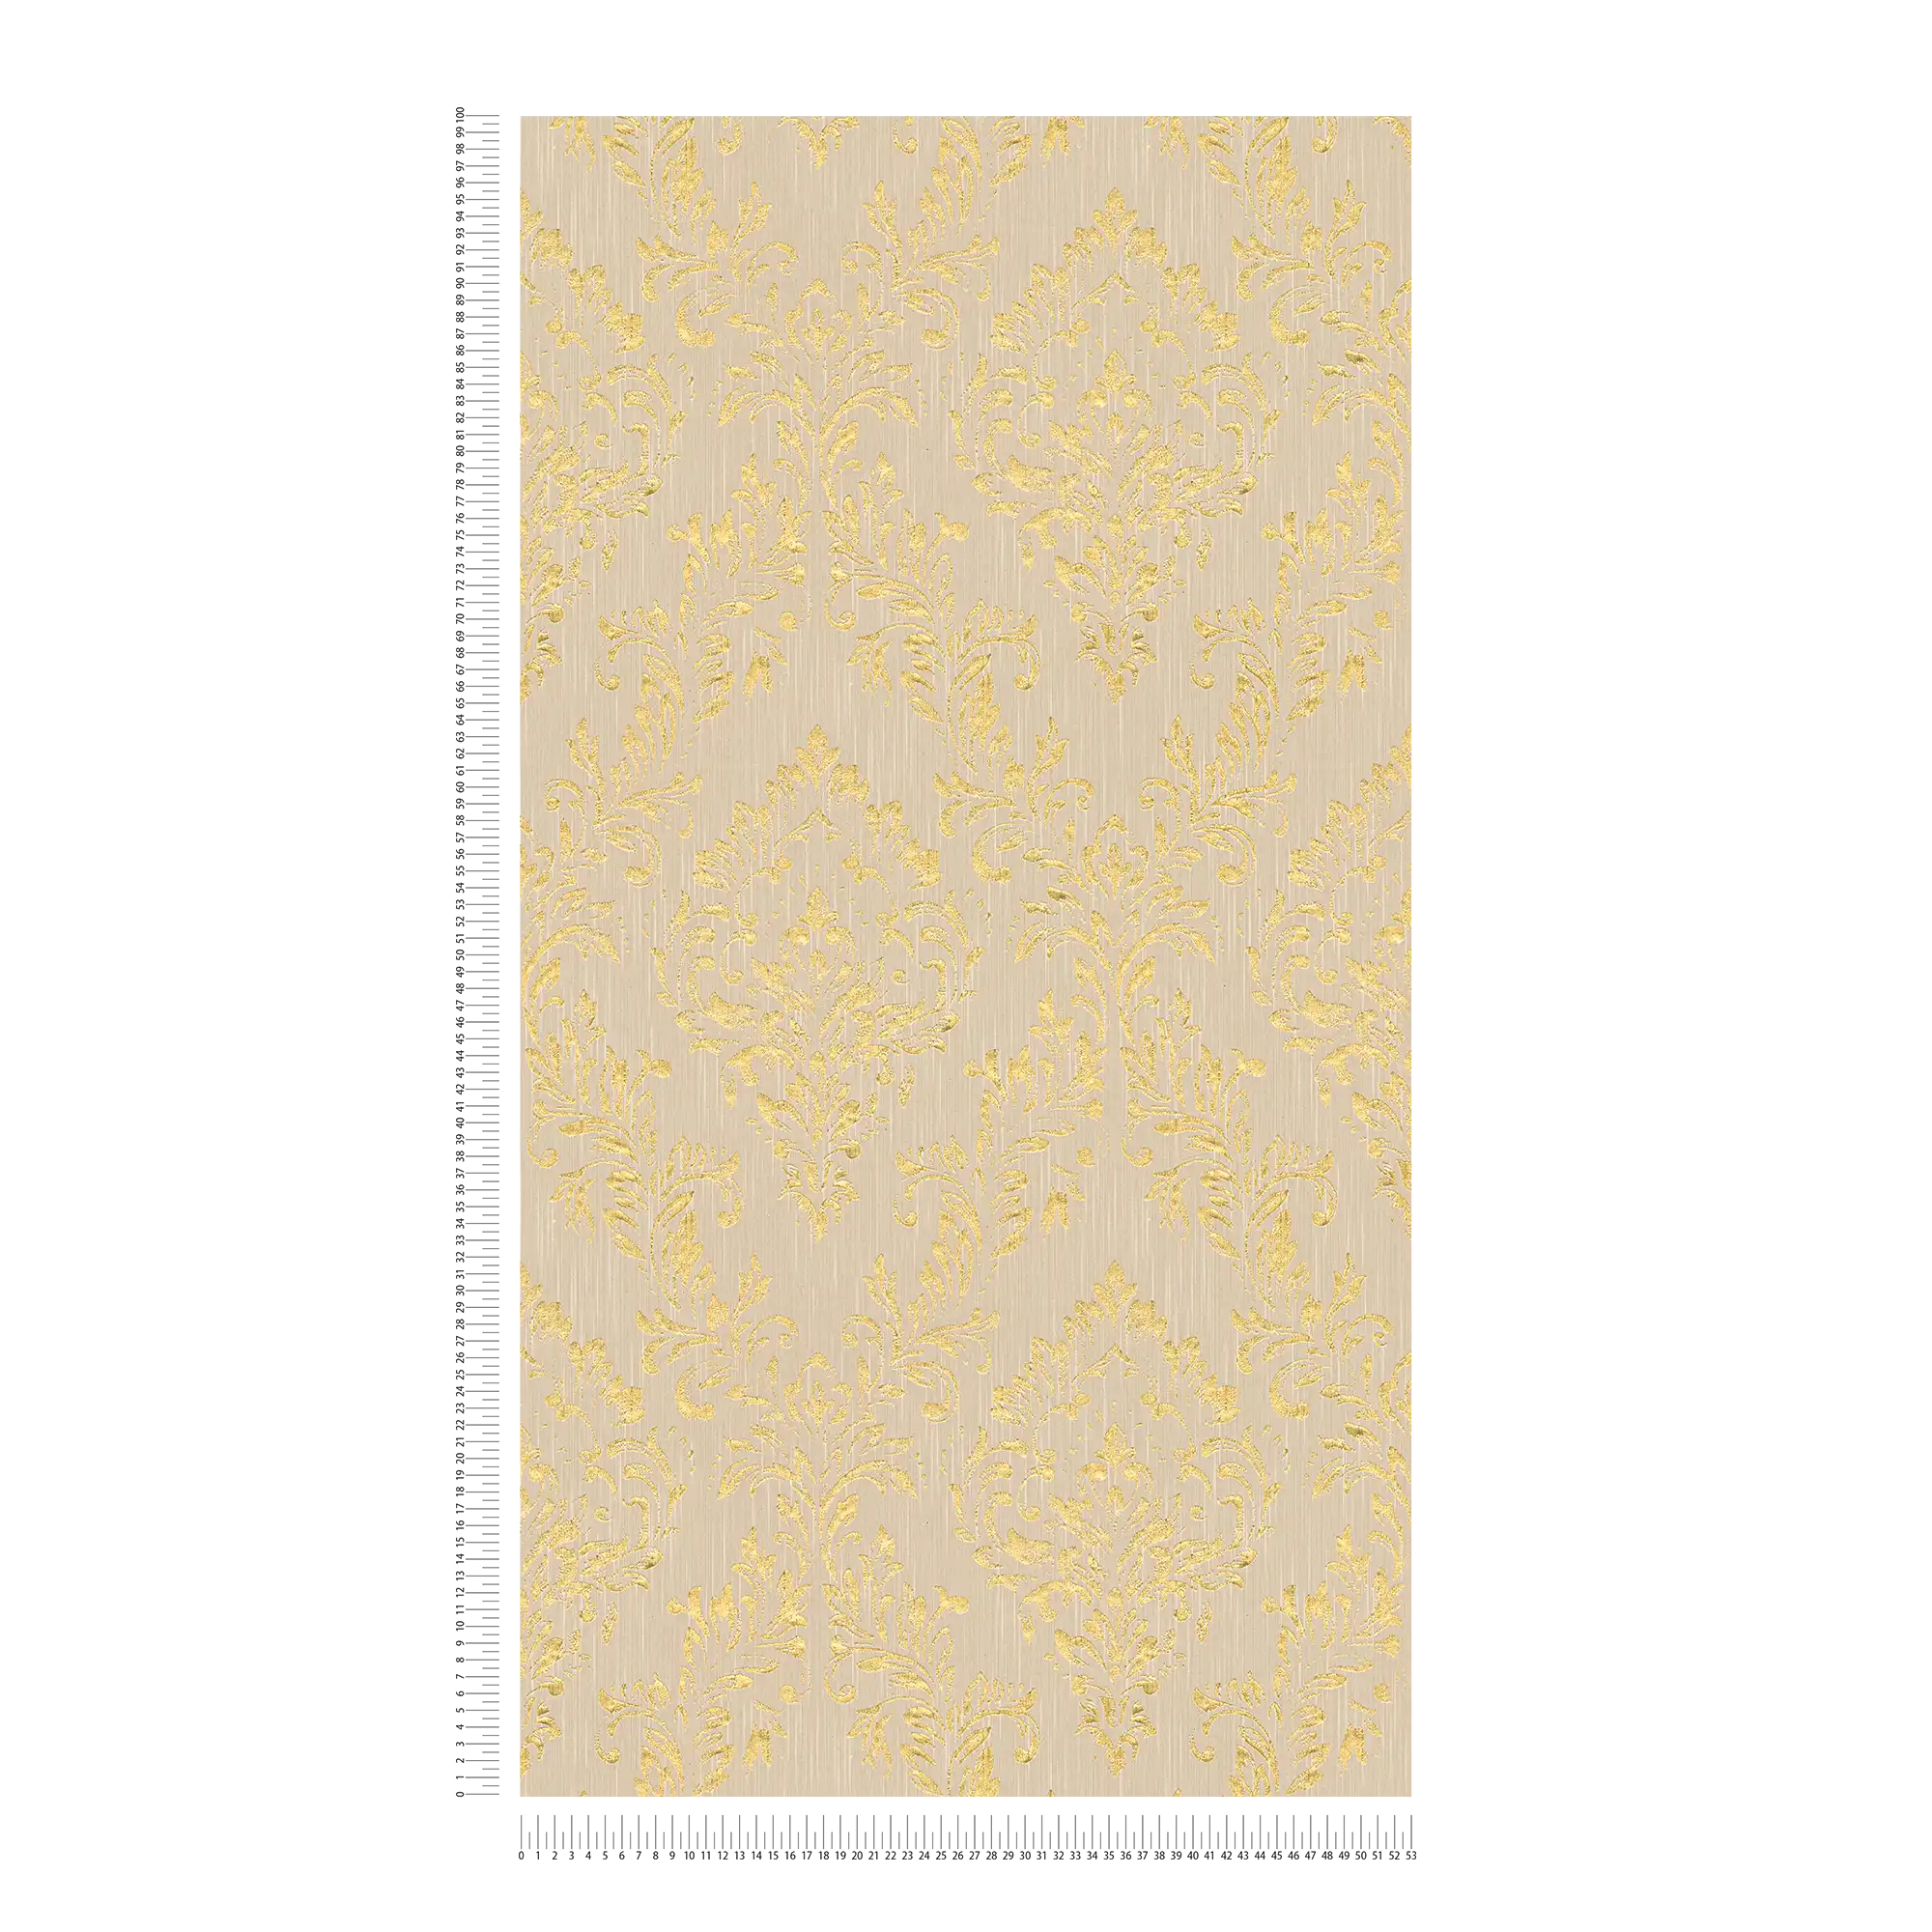             Ornament wallpaper floral with gold glitter effect - gold, beige
        